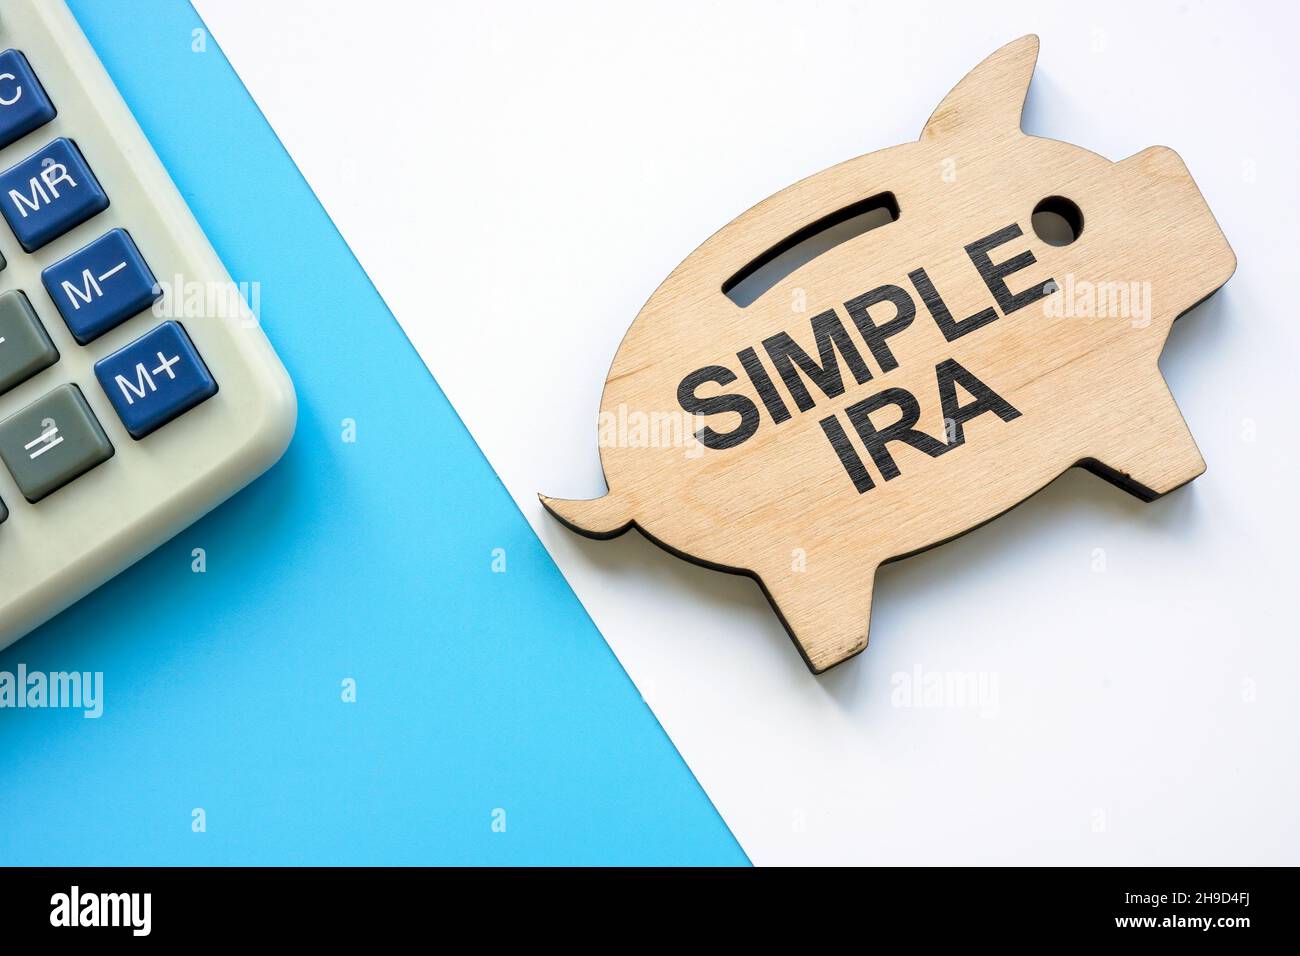 Wooden piggy bank with words SIMPLE IRA plans savings incentive match plans for employees. Stock Photo